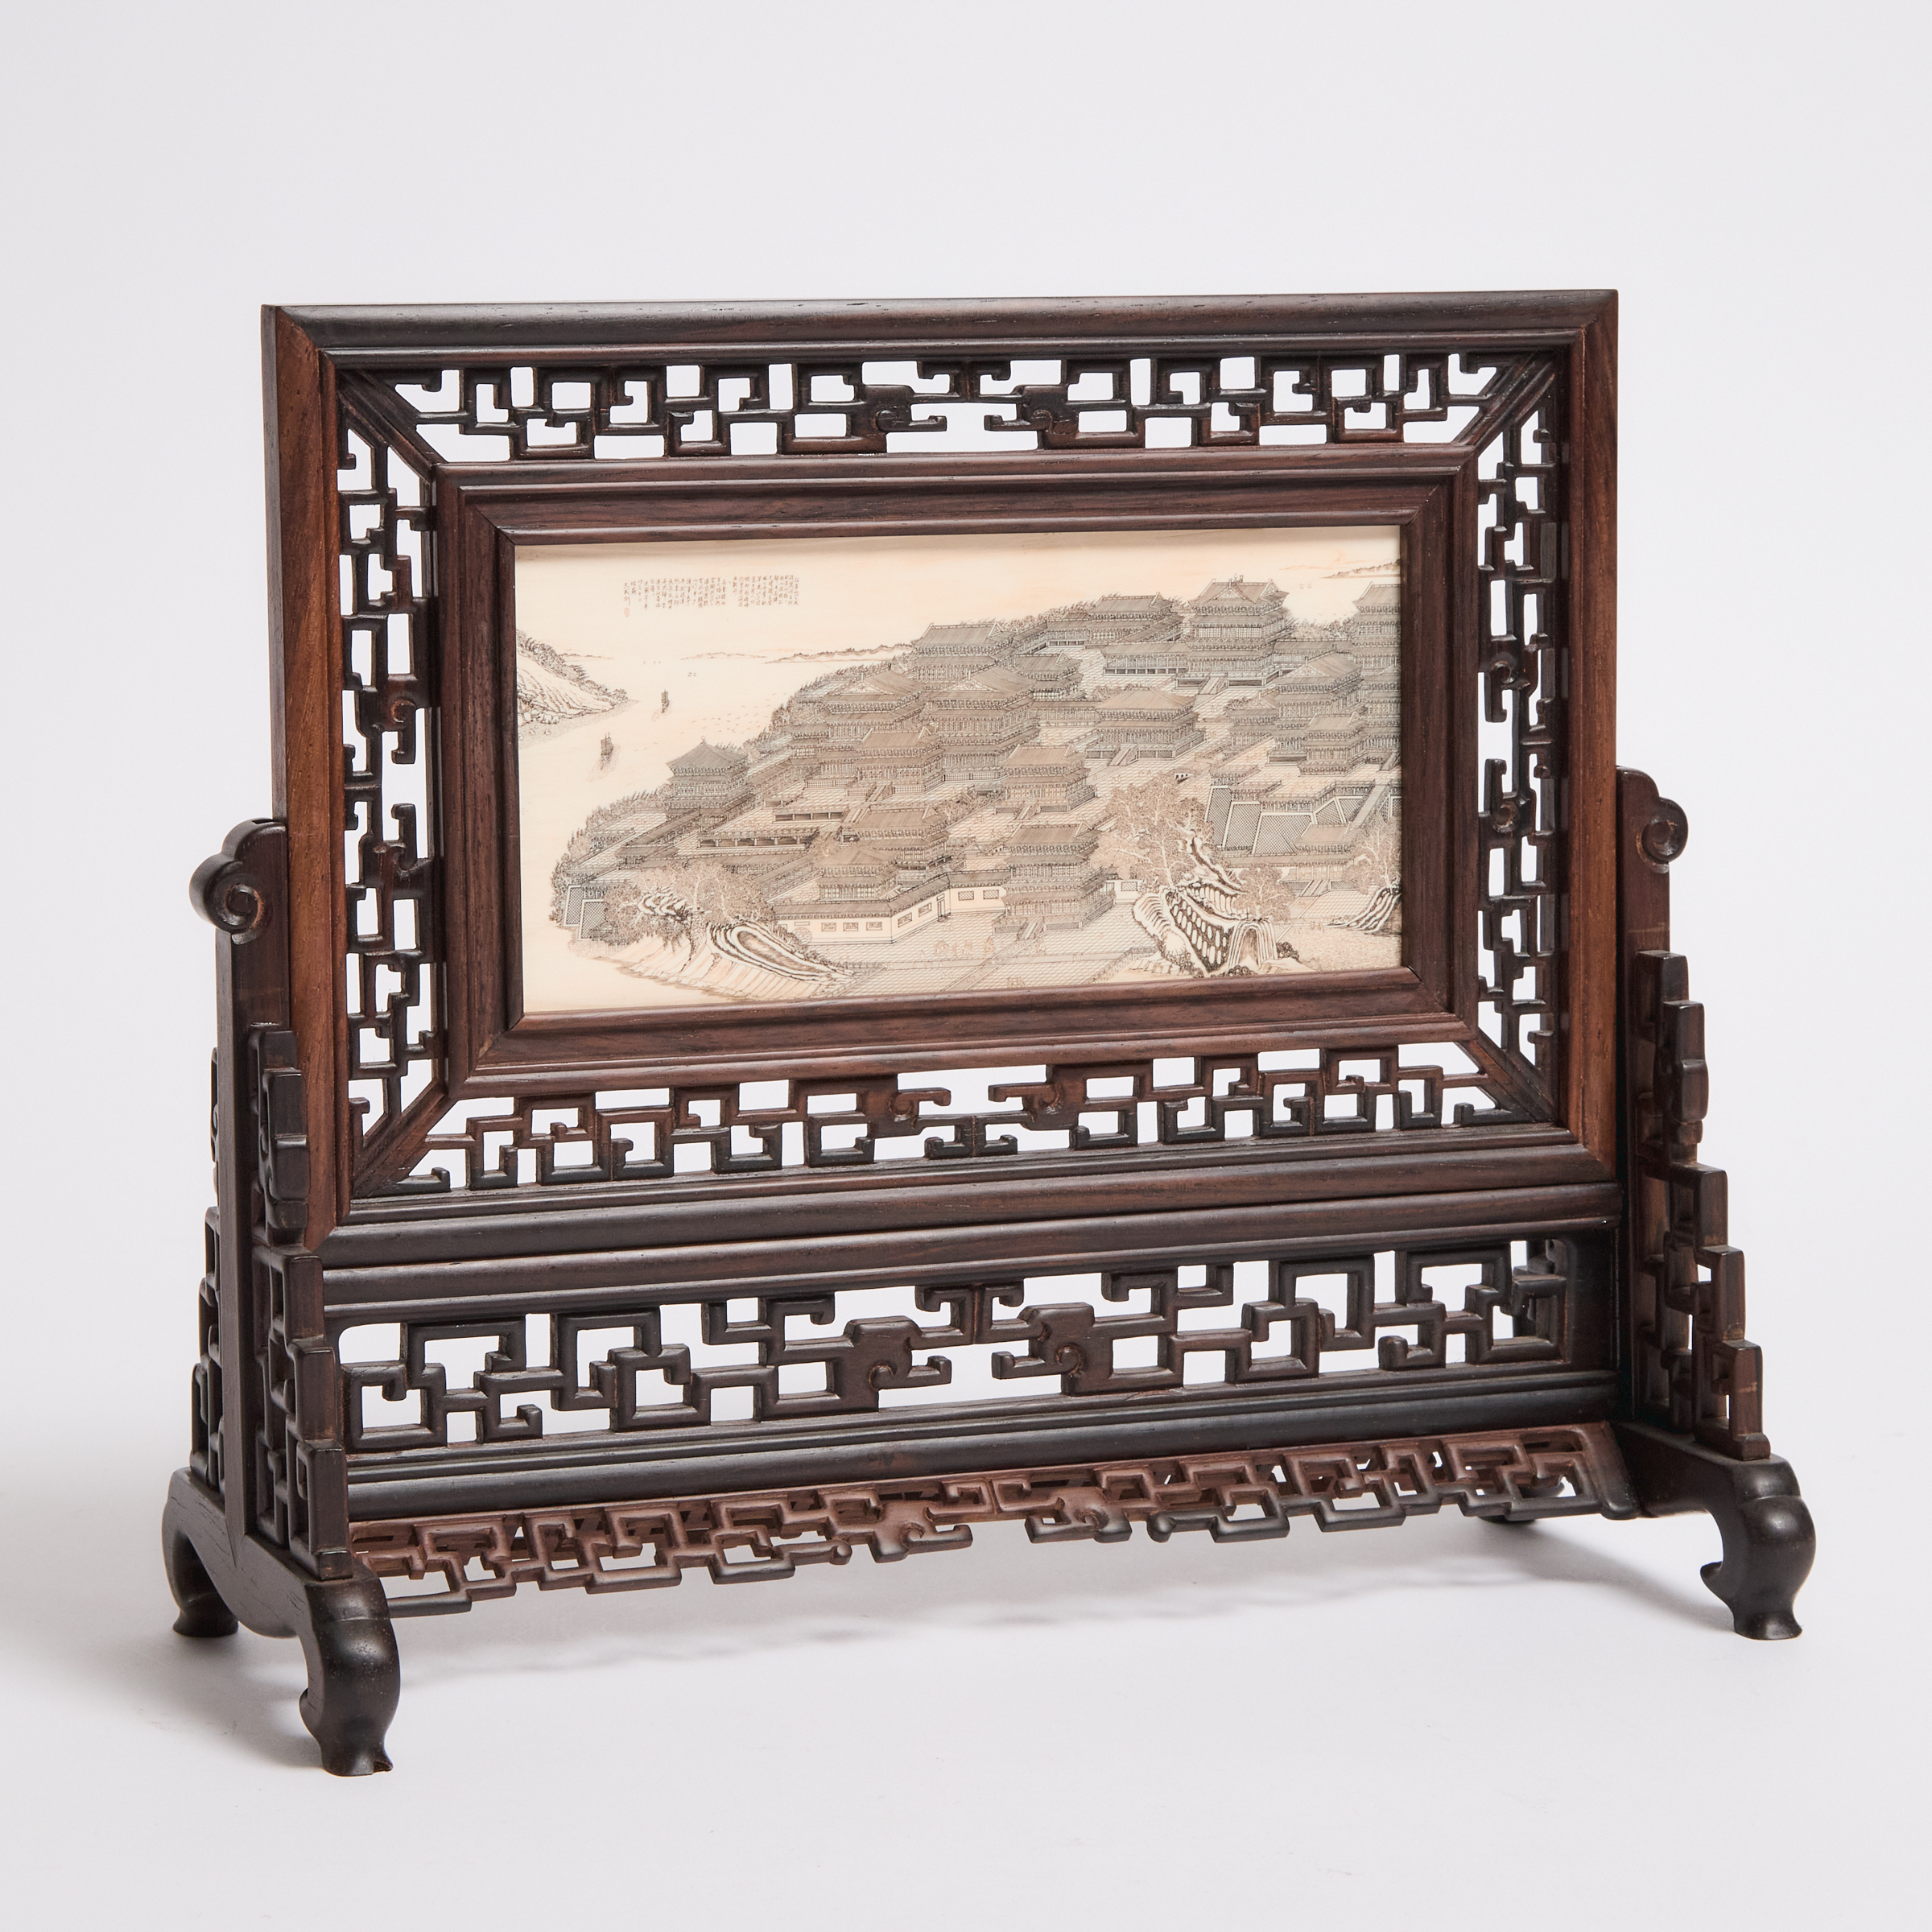 A Fine Ivory Landscape Table 2fb05ab